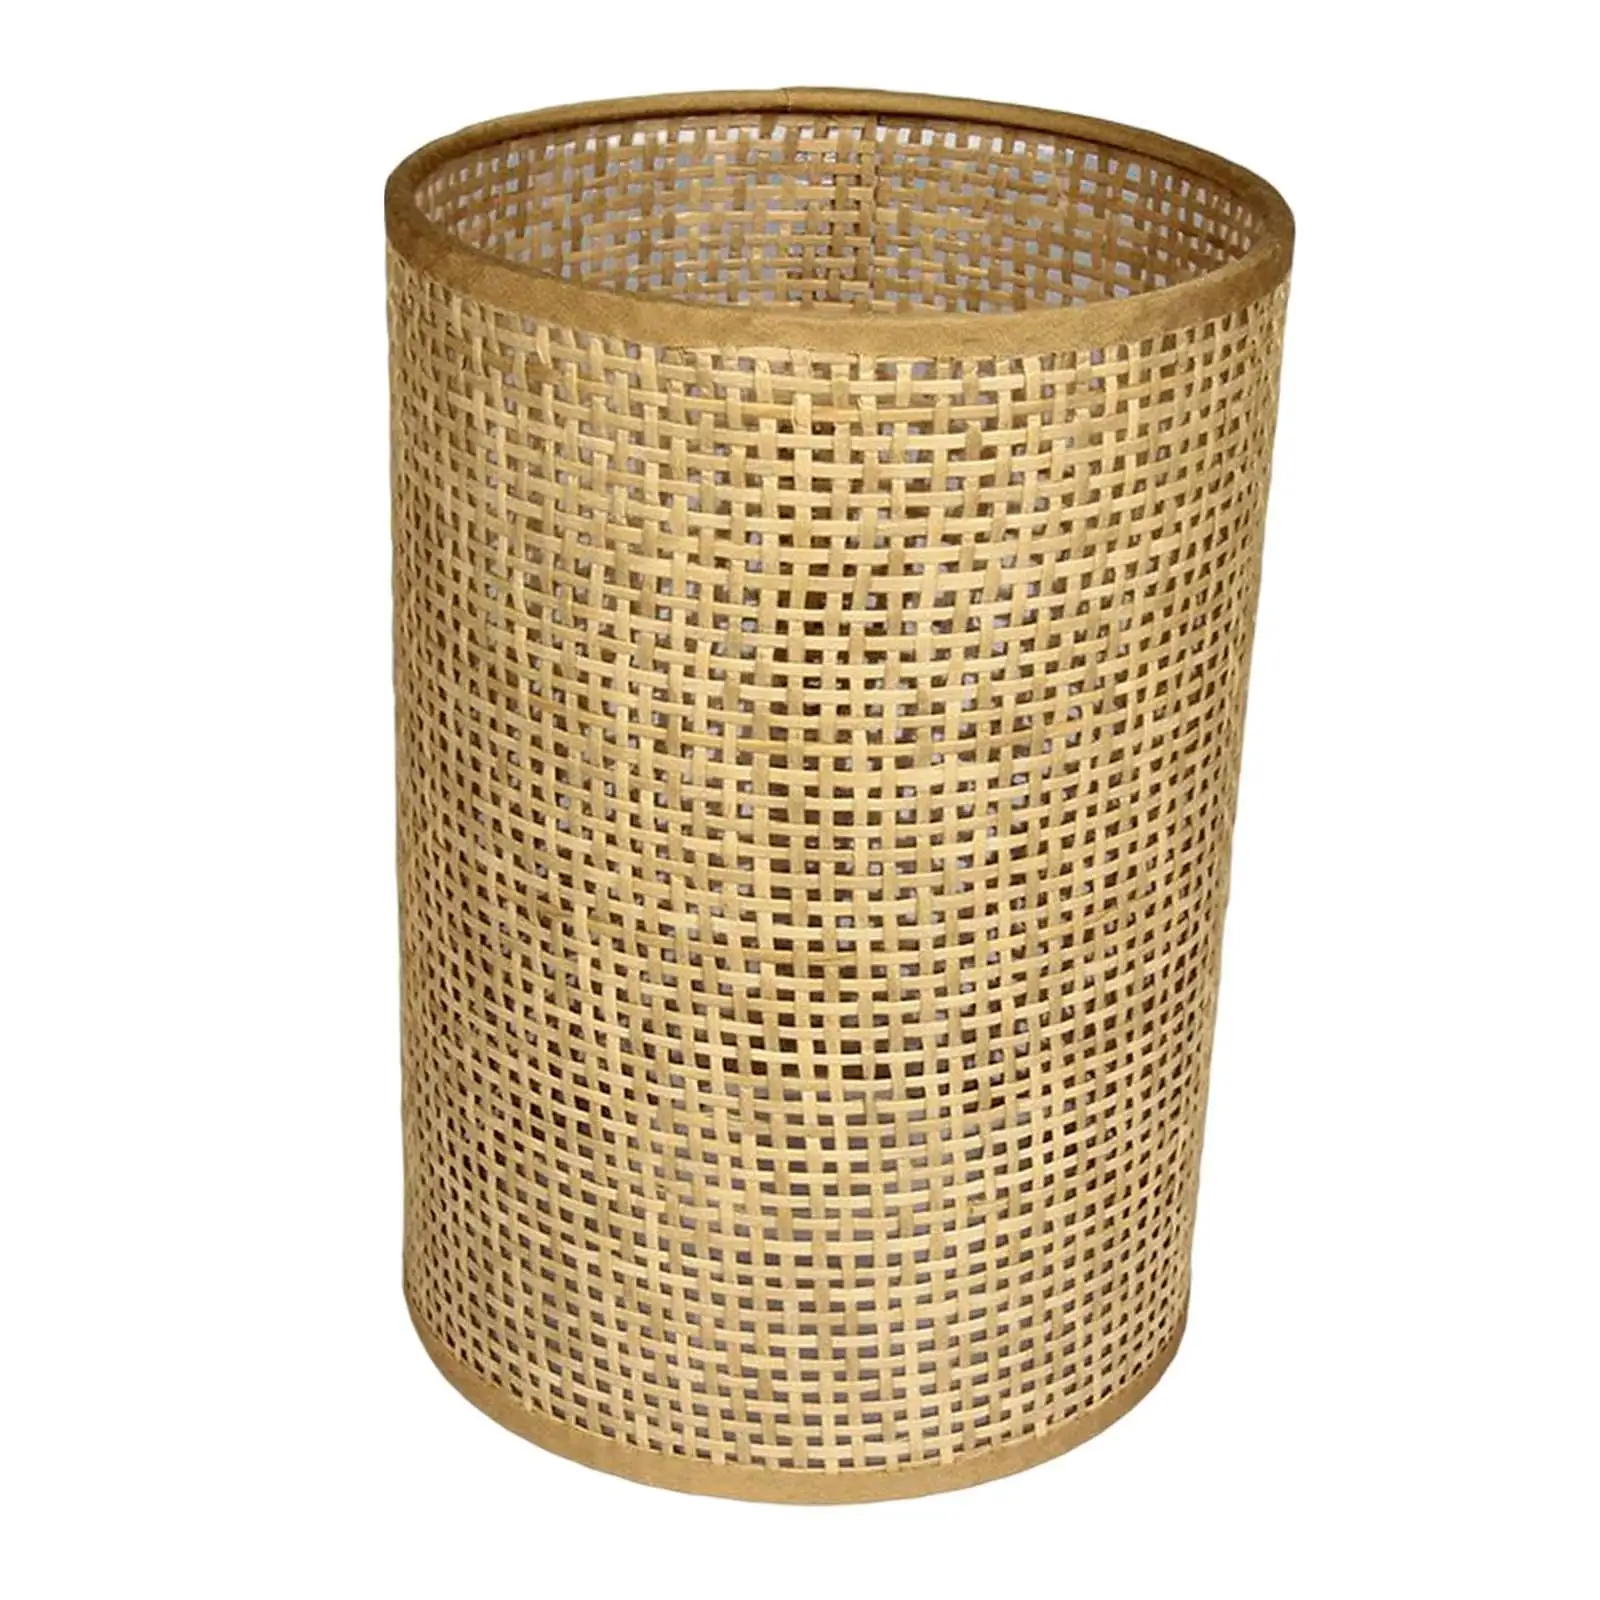 Classic Handwoven Rattan Lamp Shade Pendant Light Cover Decorative Chandelier Hanging Lampshade for Dorm Living Room Home Decor